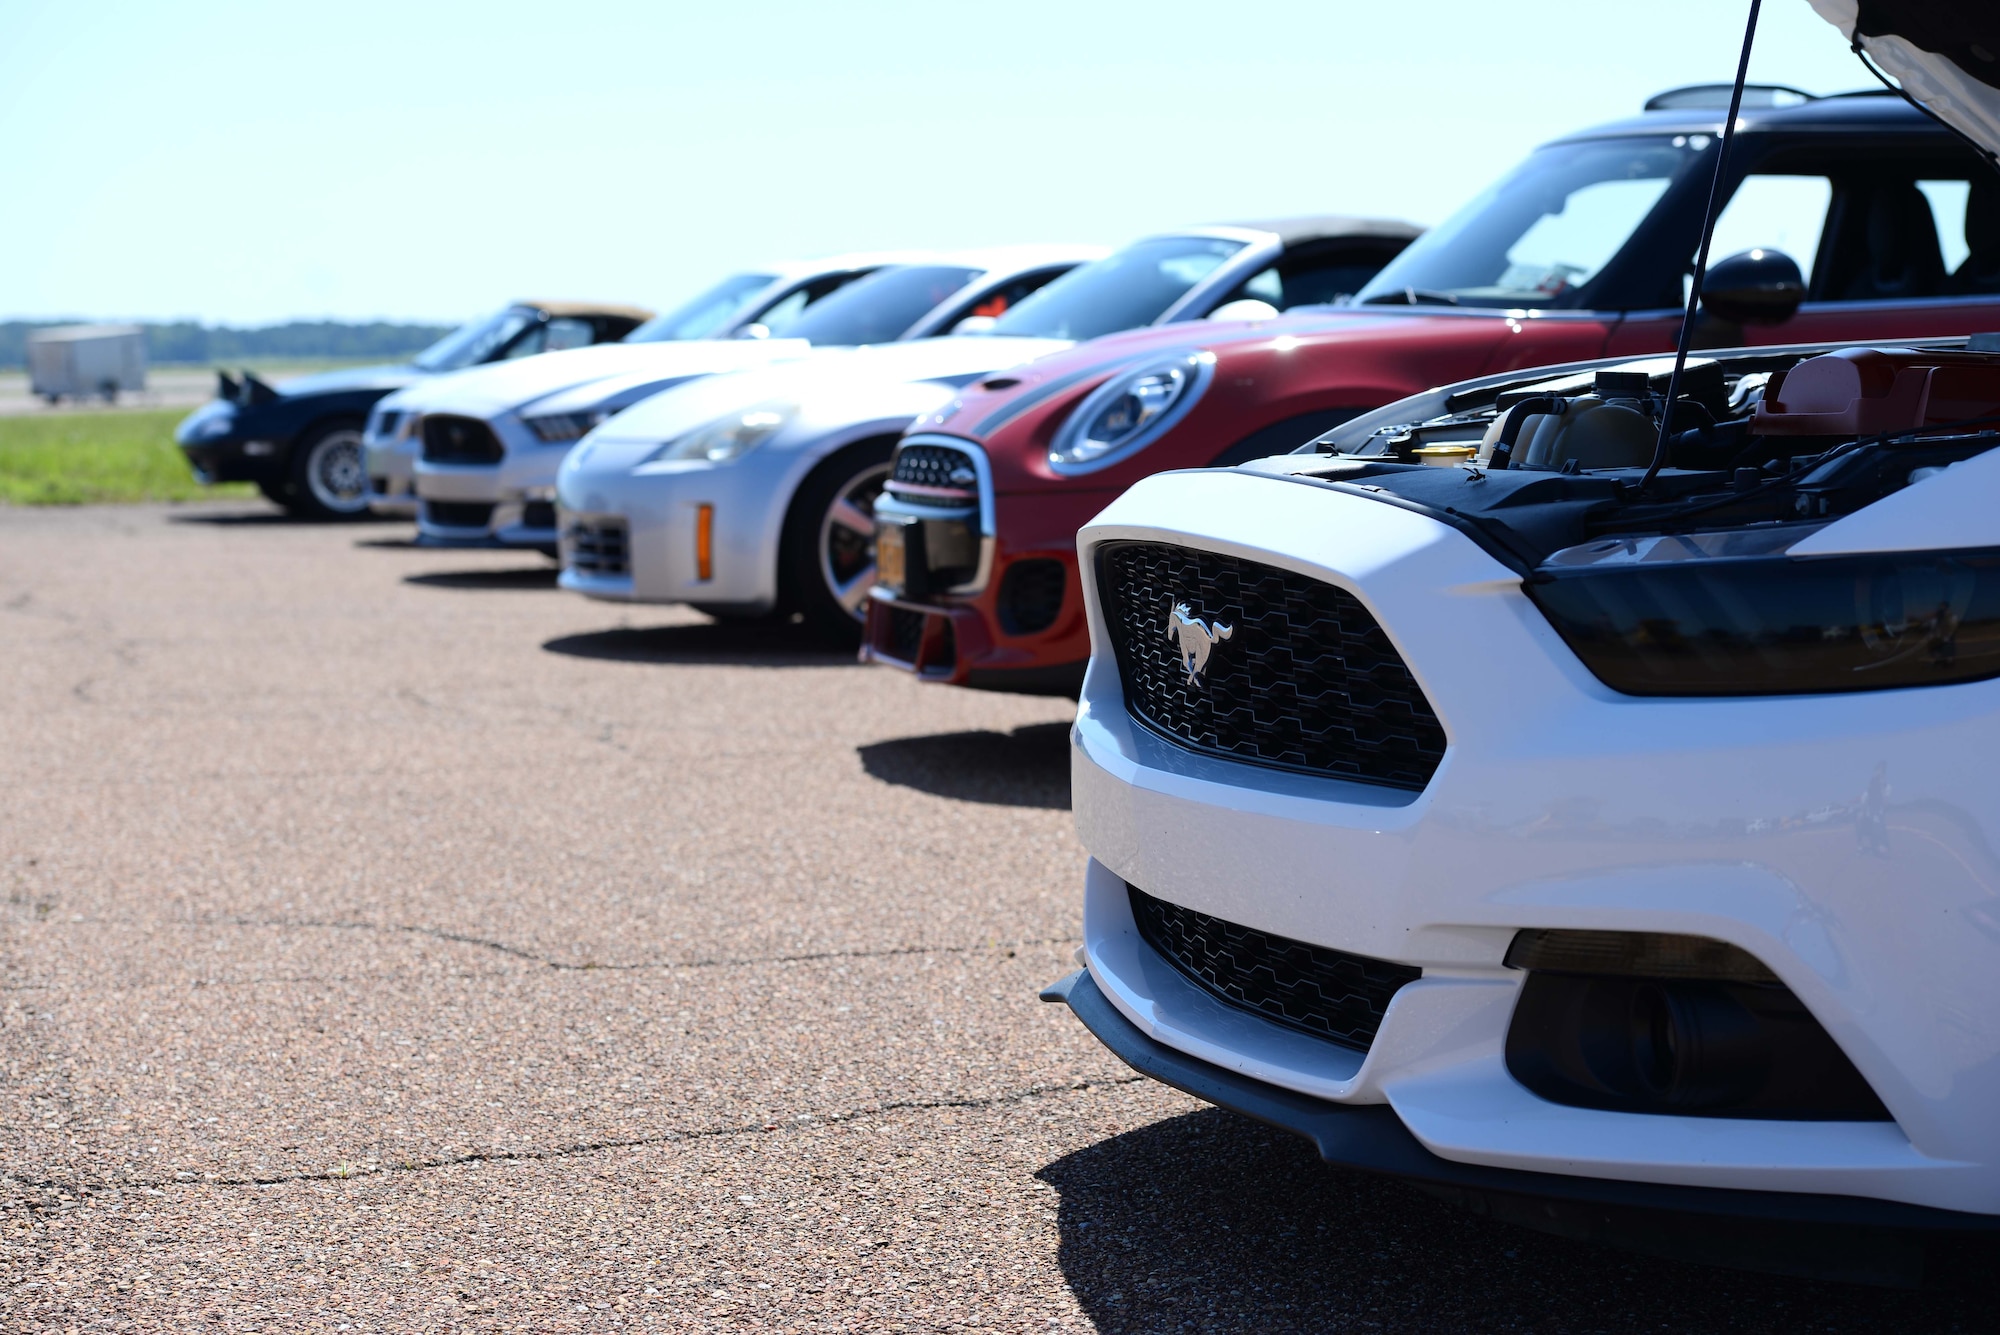 Autocross cars line up before a race, Aug. 17, 2019, on Columbus Air Force Base, Miss. The Mississippi Region of the Sport Cars Club of America holds the event on base once a quarter. (U.S. Air Force photo by Airman 1st Class Jake Jacobsen)